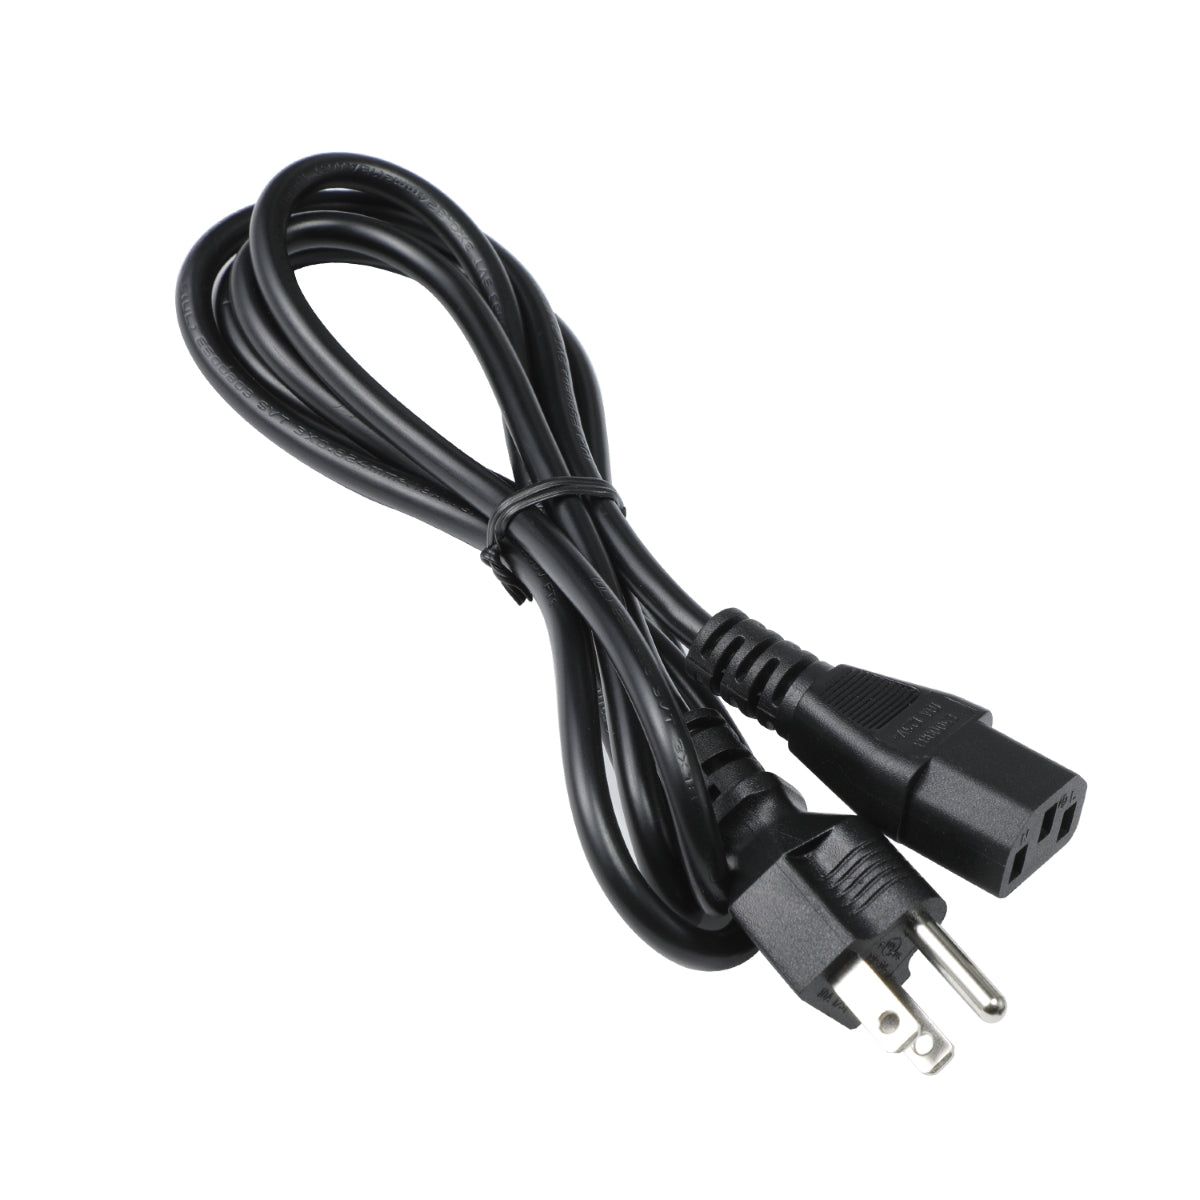 Power Cord for Lexmark CX331adwe Color Laser Printer.